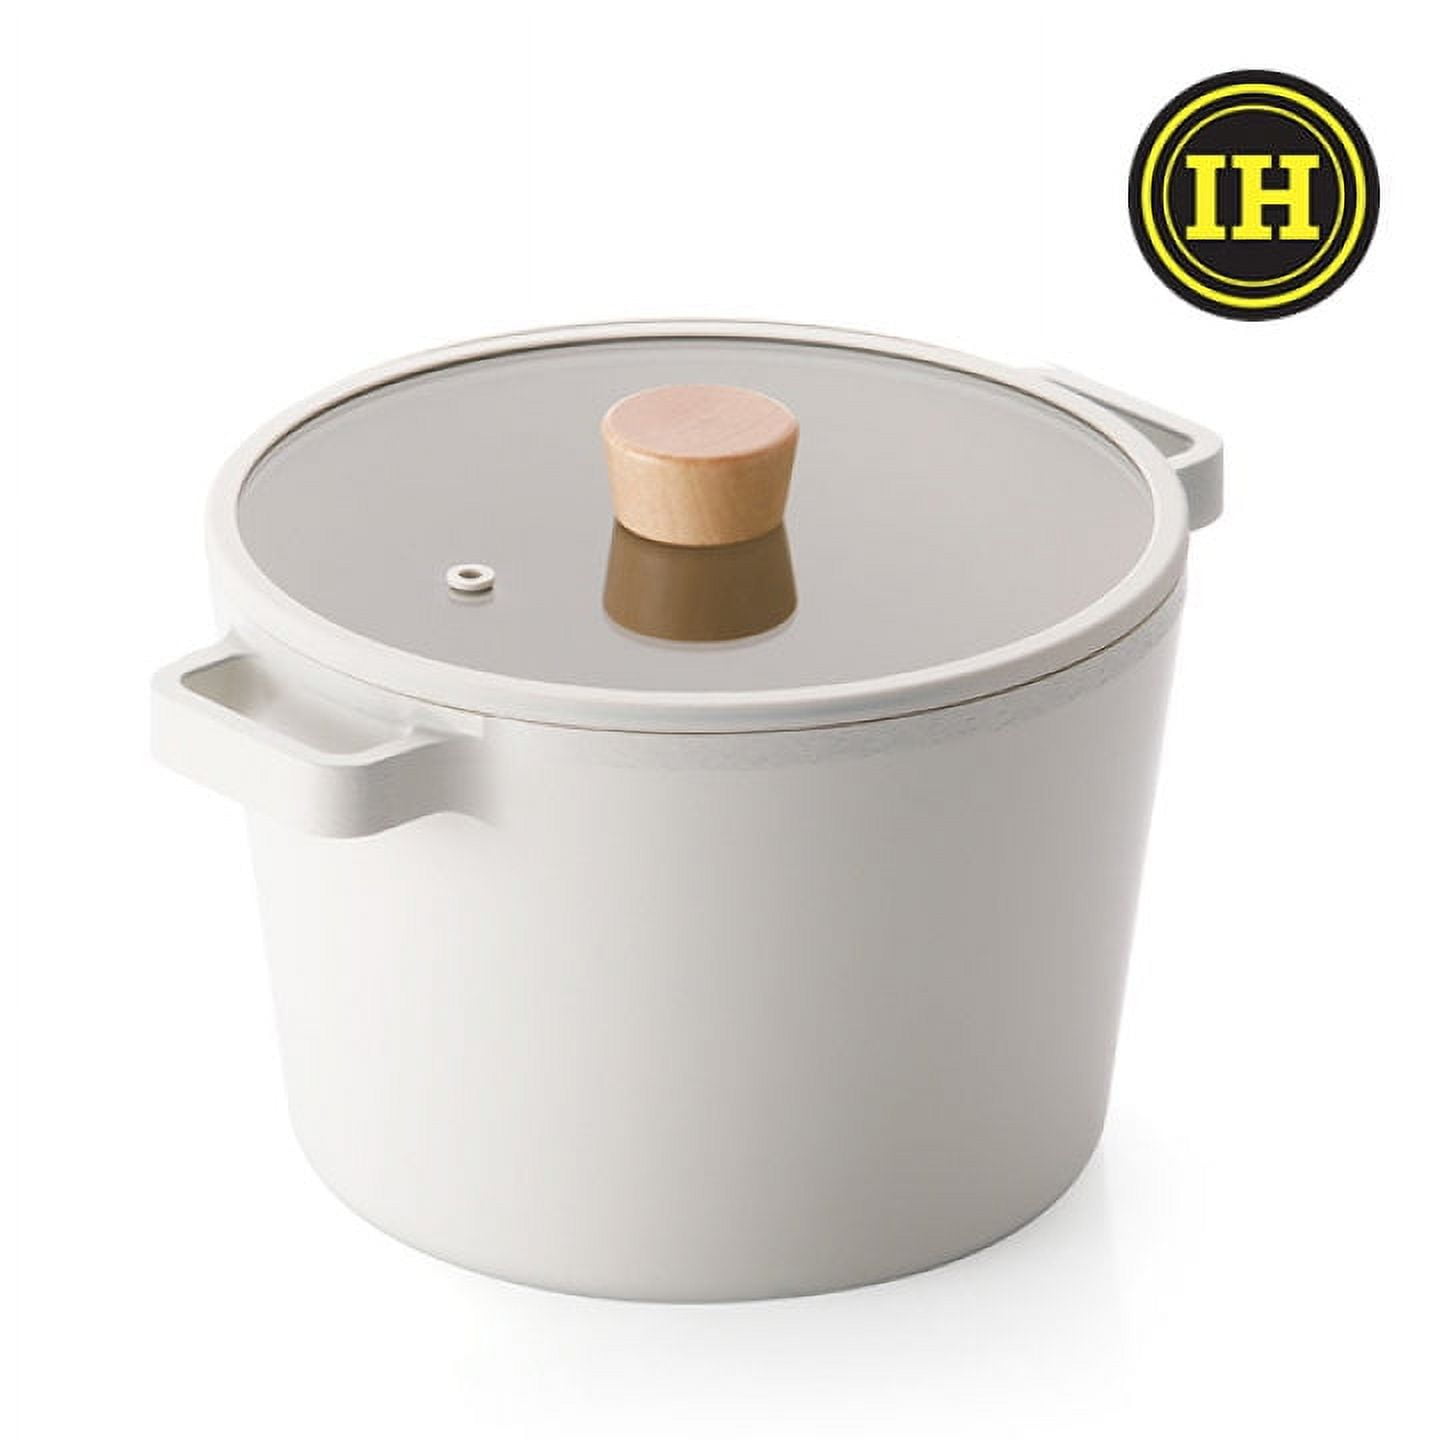 Neoflam Non-Stick Aluminum Stock Pot with Lid